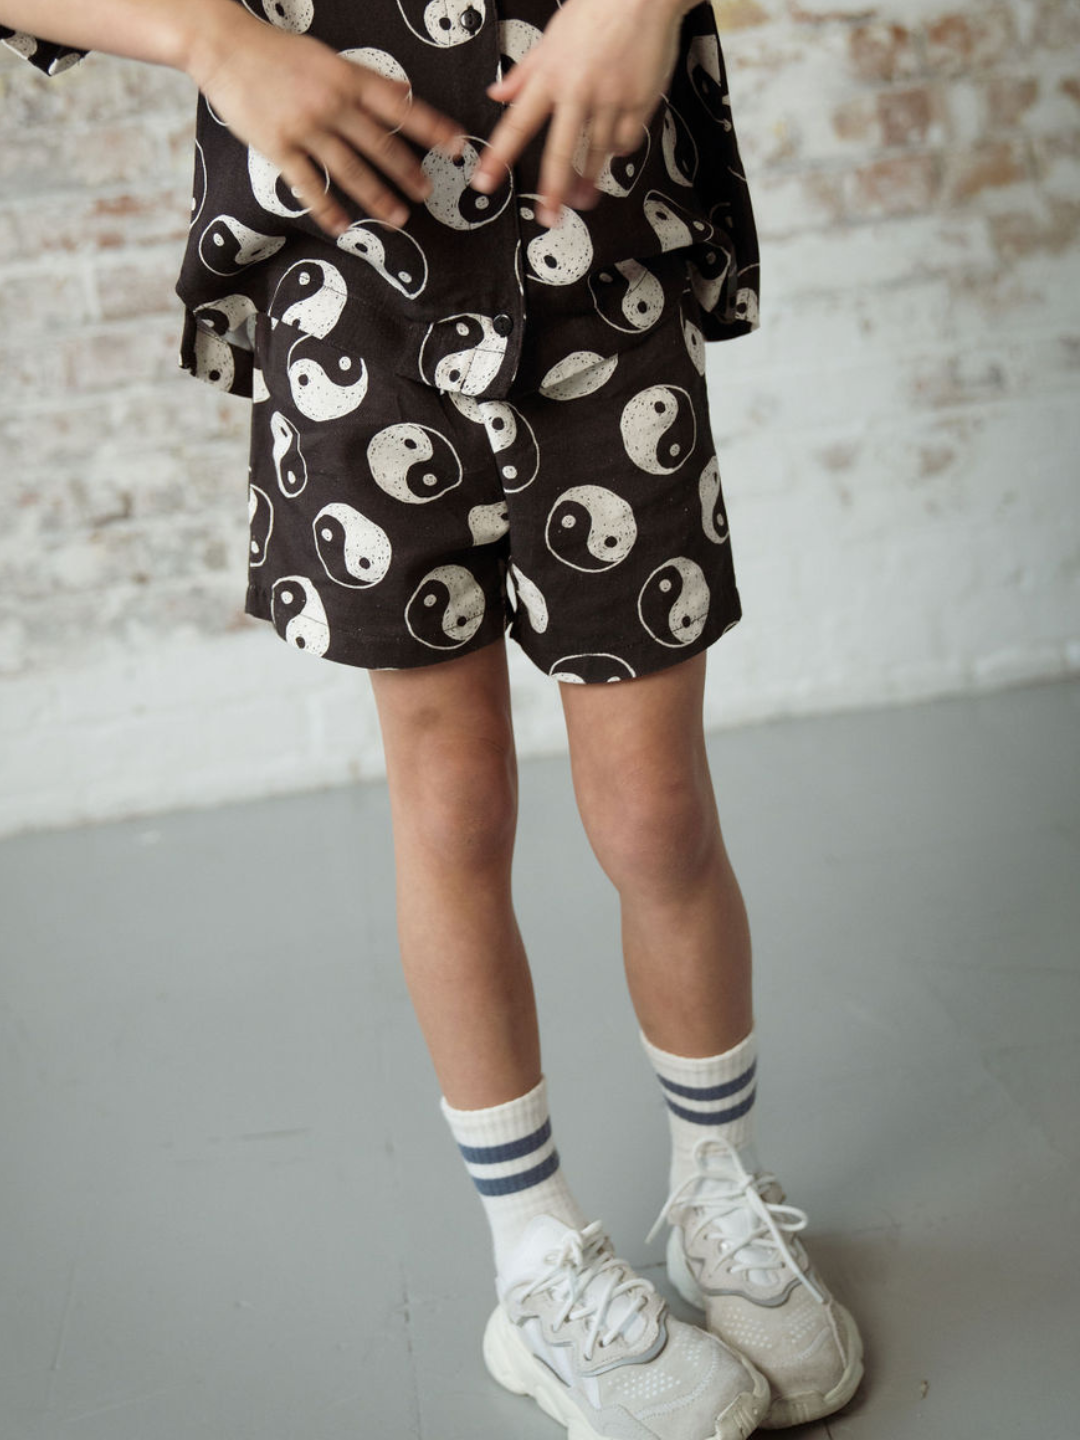 A front view of the elastic drawstring black shorts with a yin and yang pattern all over on a child.